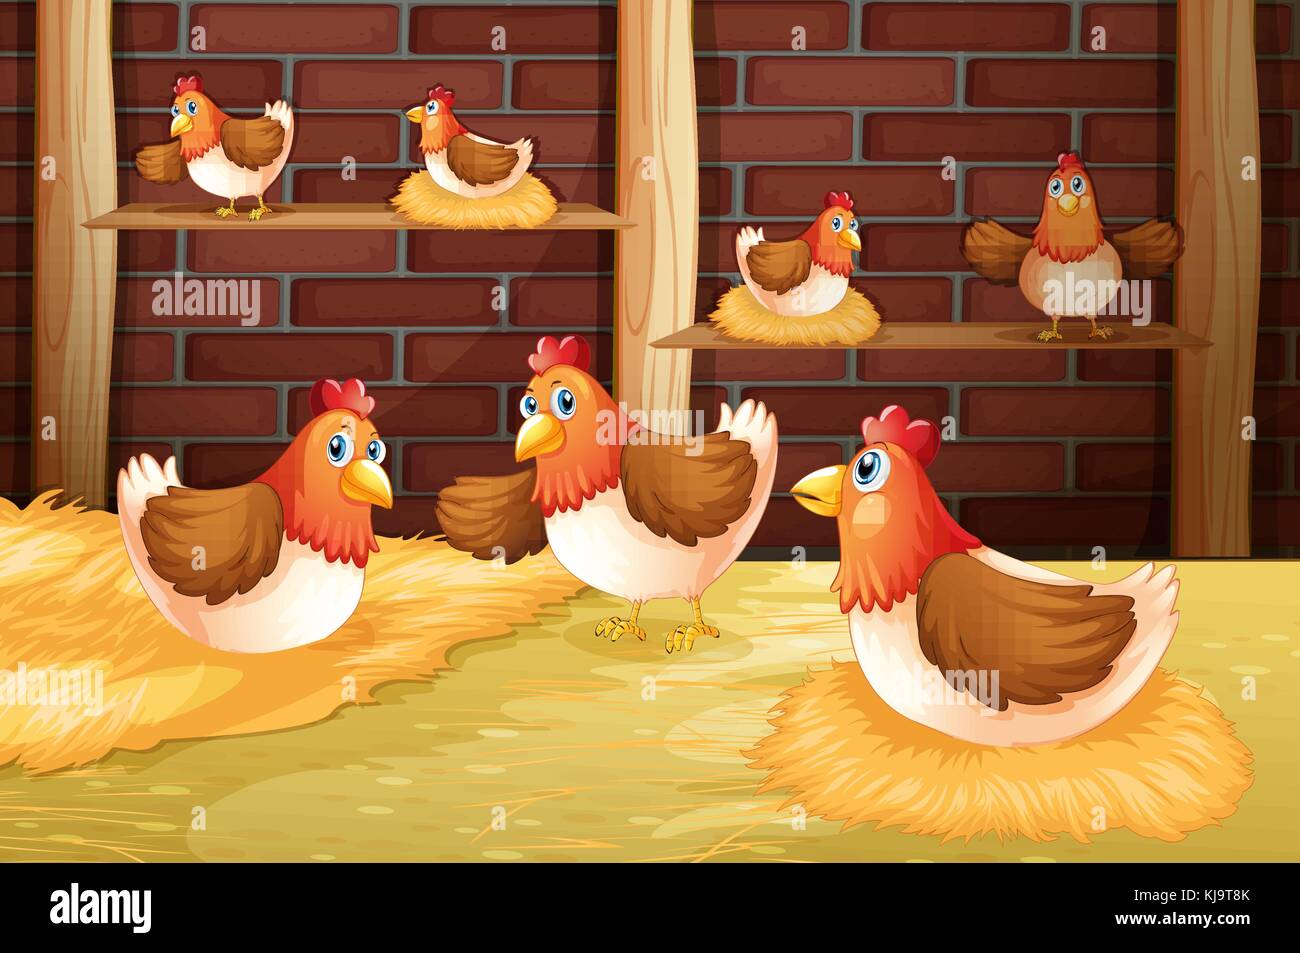 Illustration of the seven hens Stock Vector